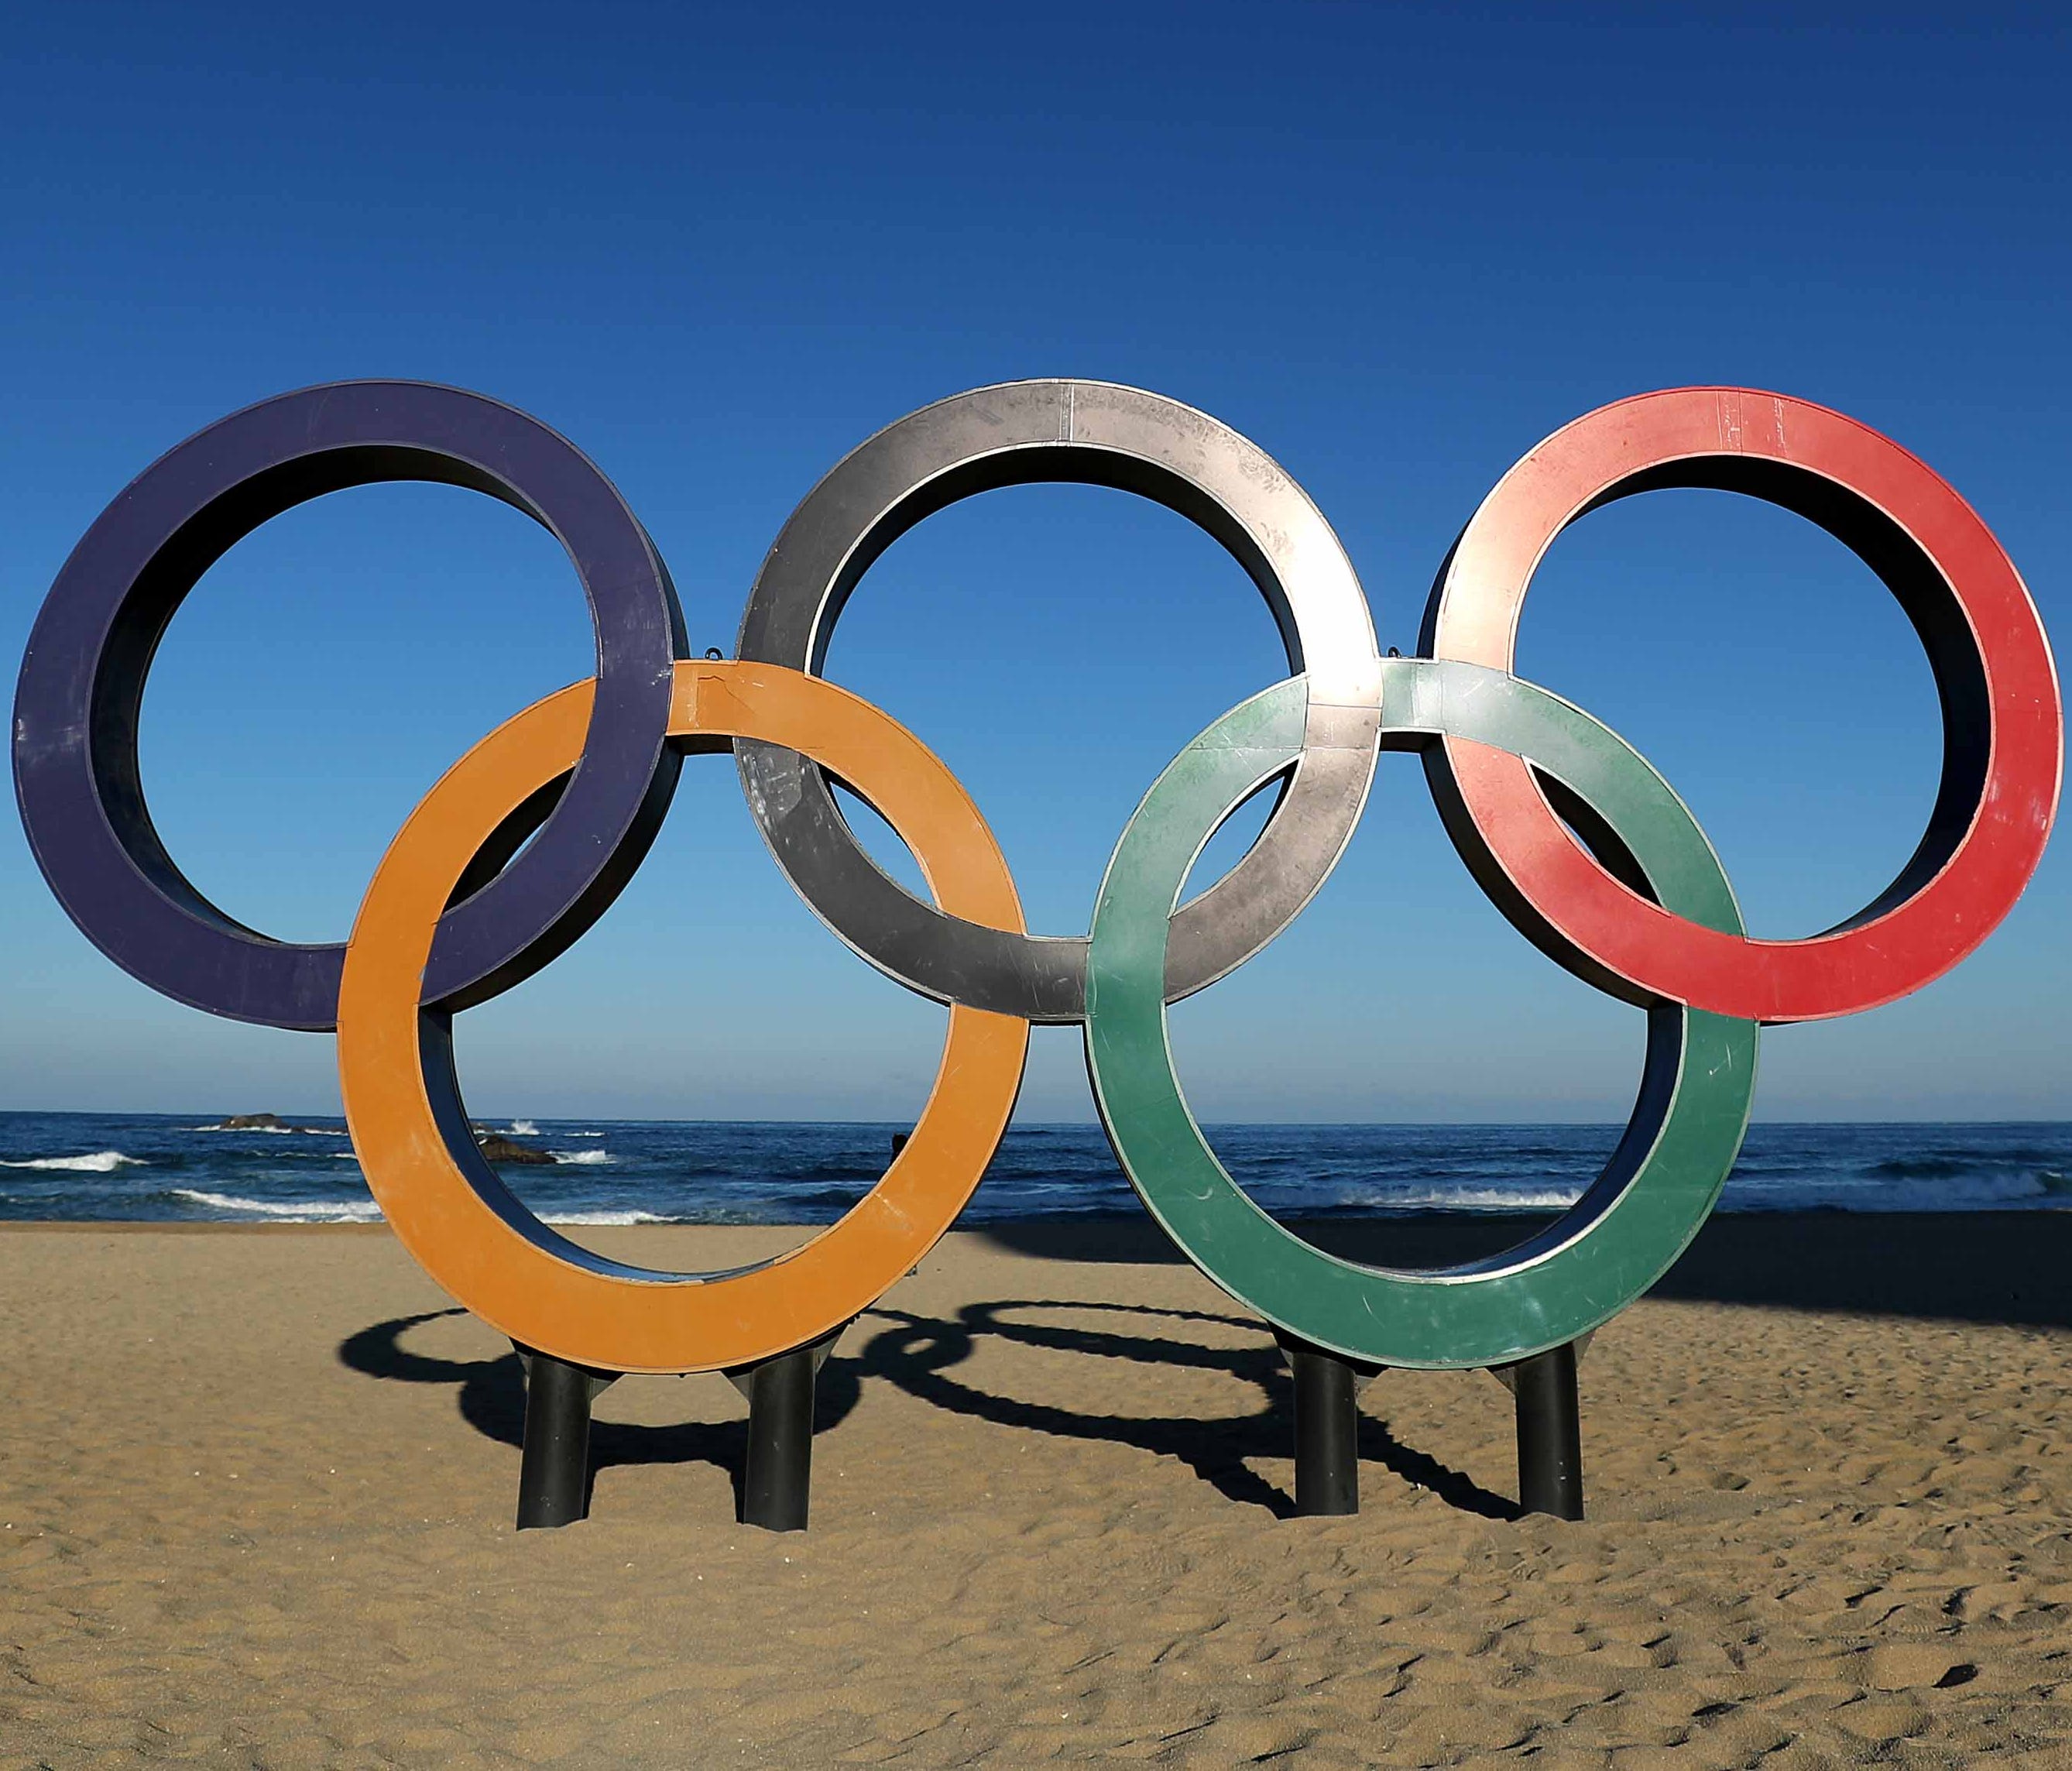 The Olympic Rings on the beach at Gangneung ahead of the Pyeongchang 2018 Winter Olympics.